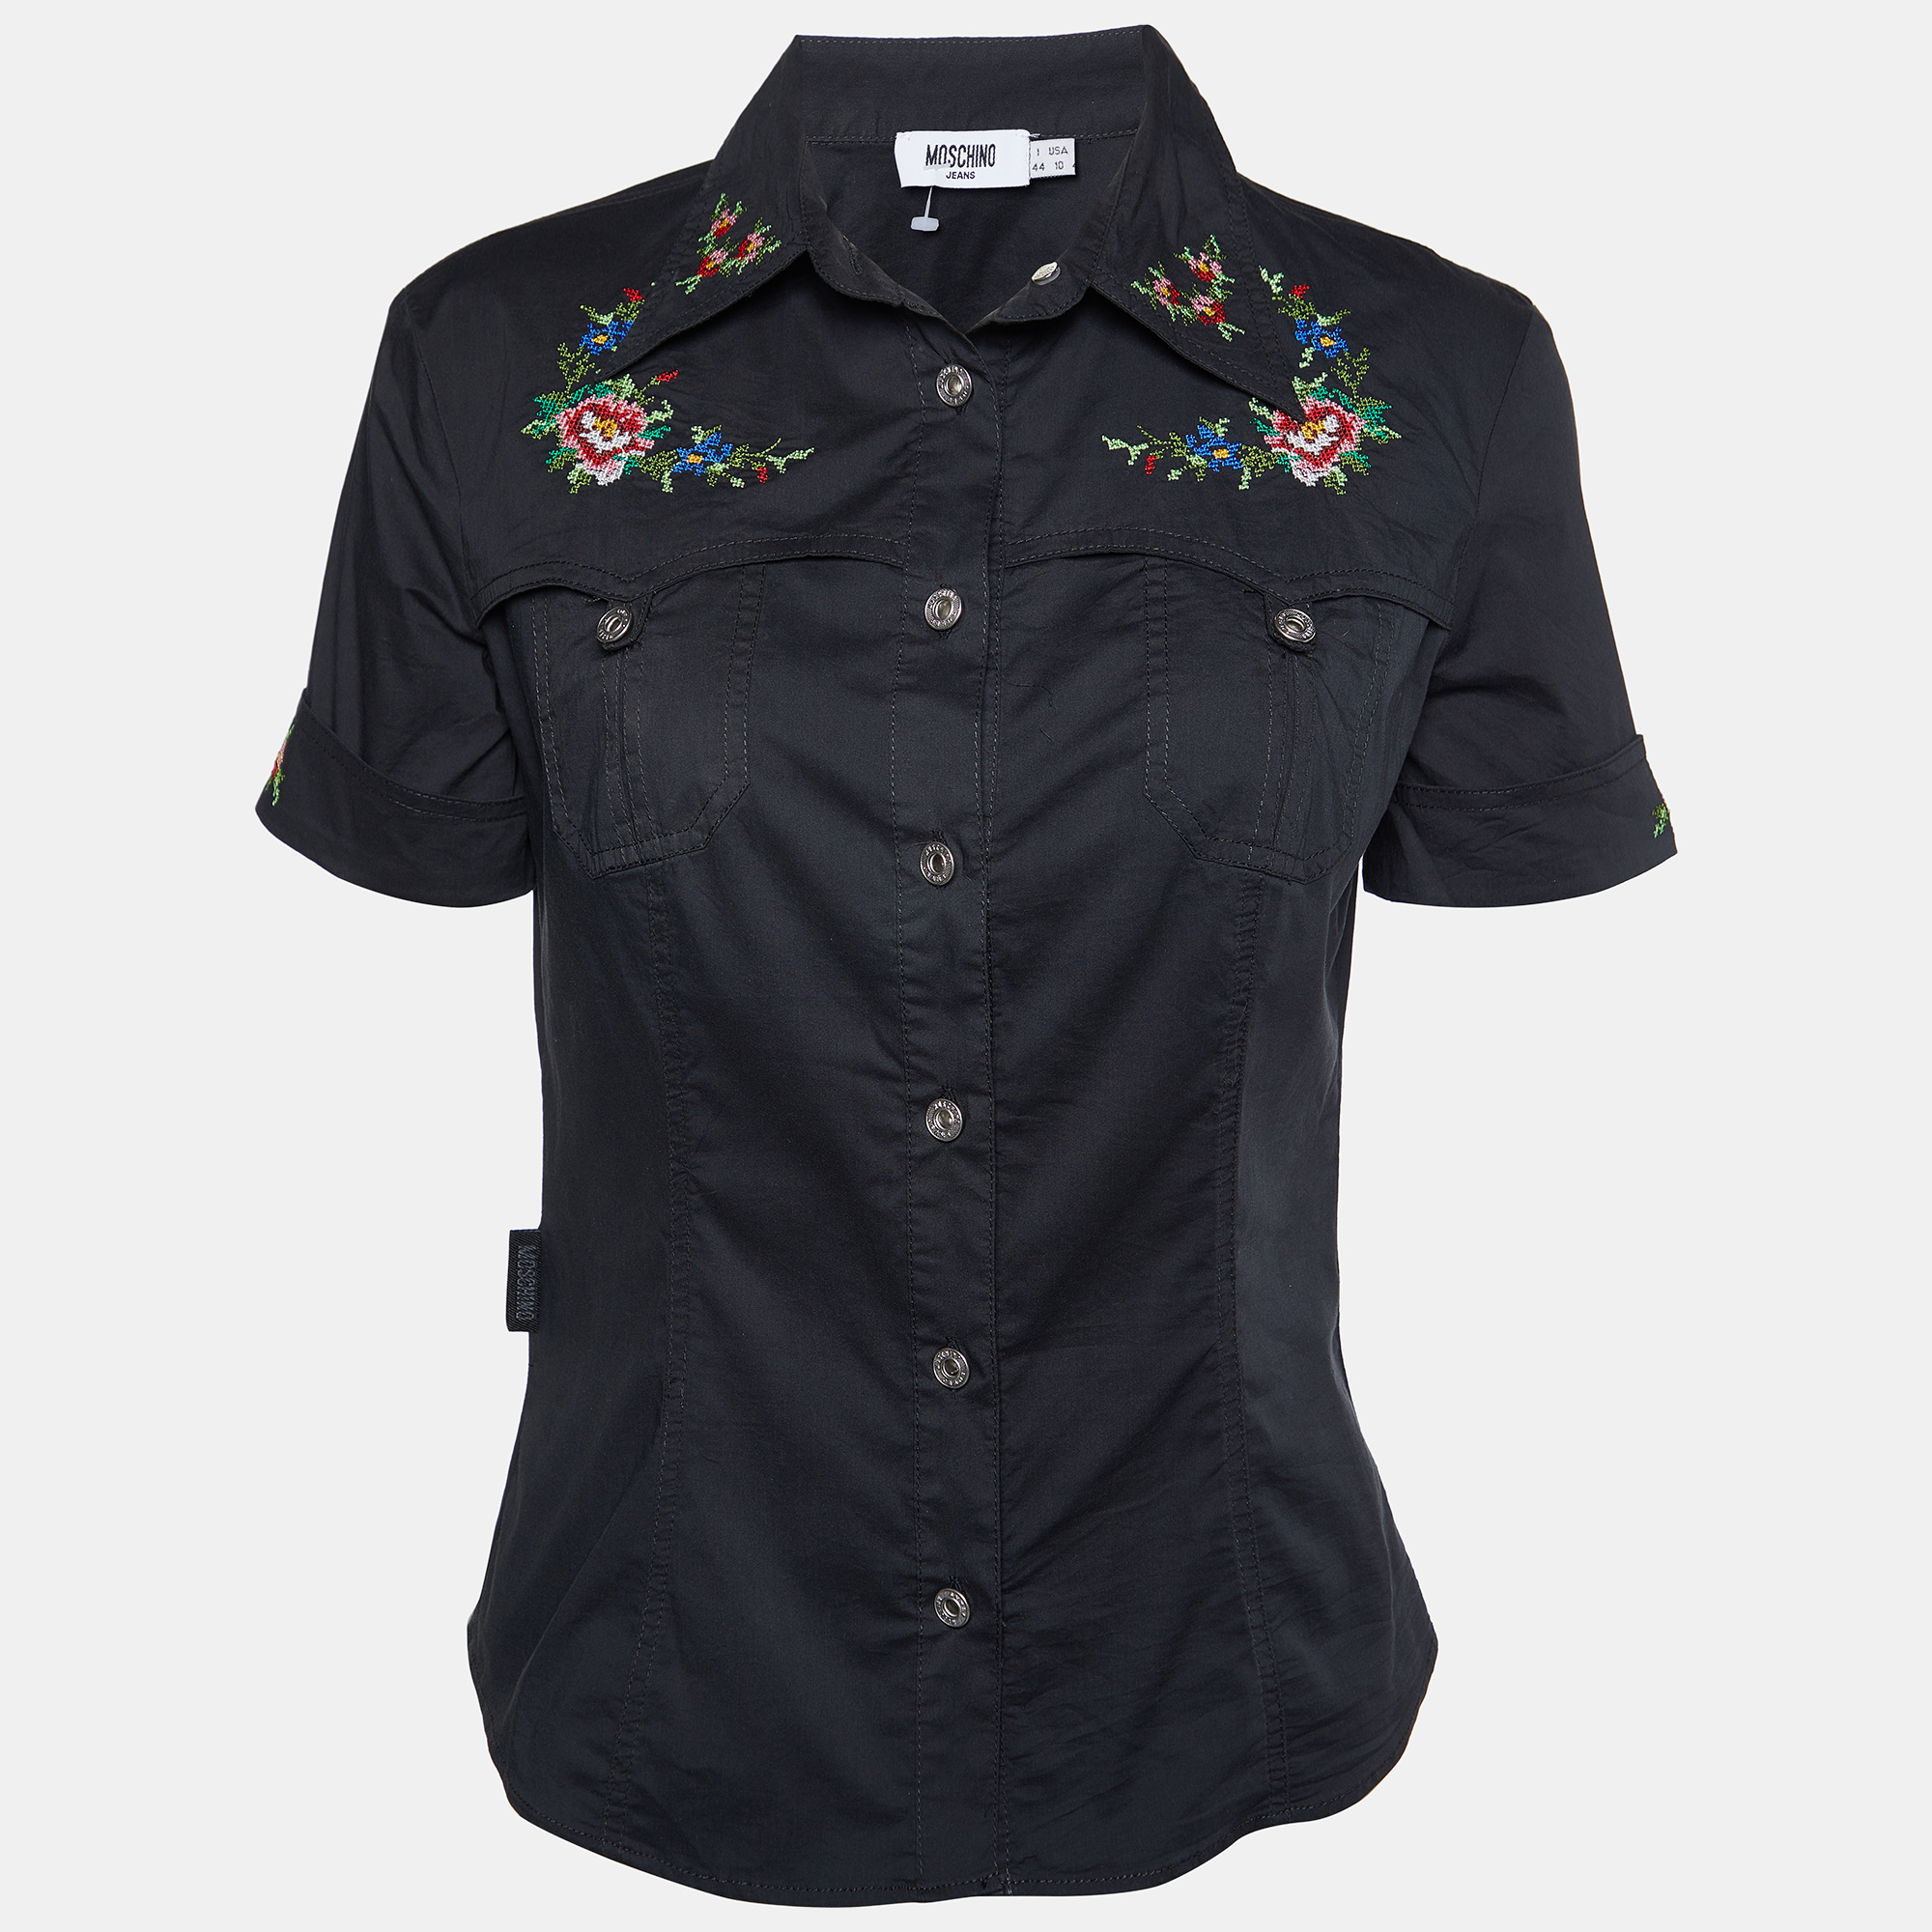 Moschino Jeans Black Cotton Embroidered Detail Button Front Shirt M